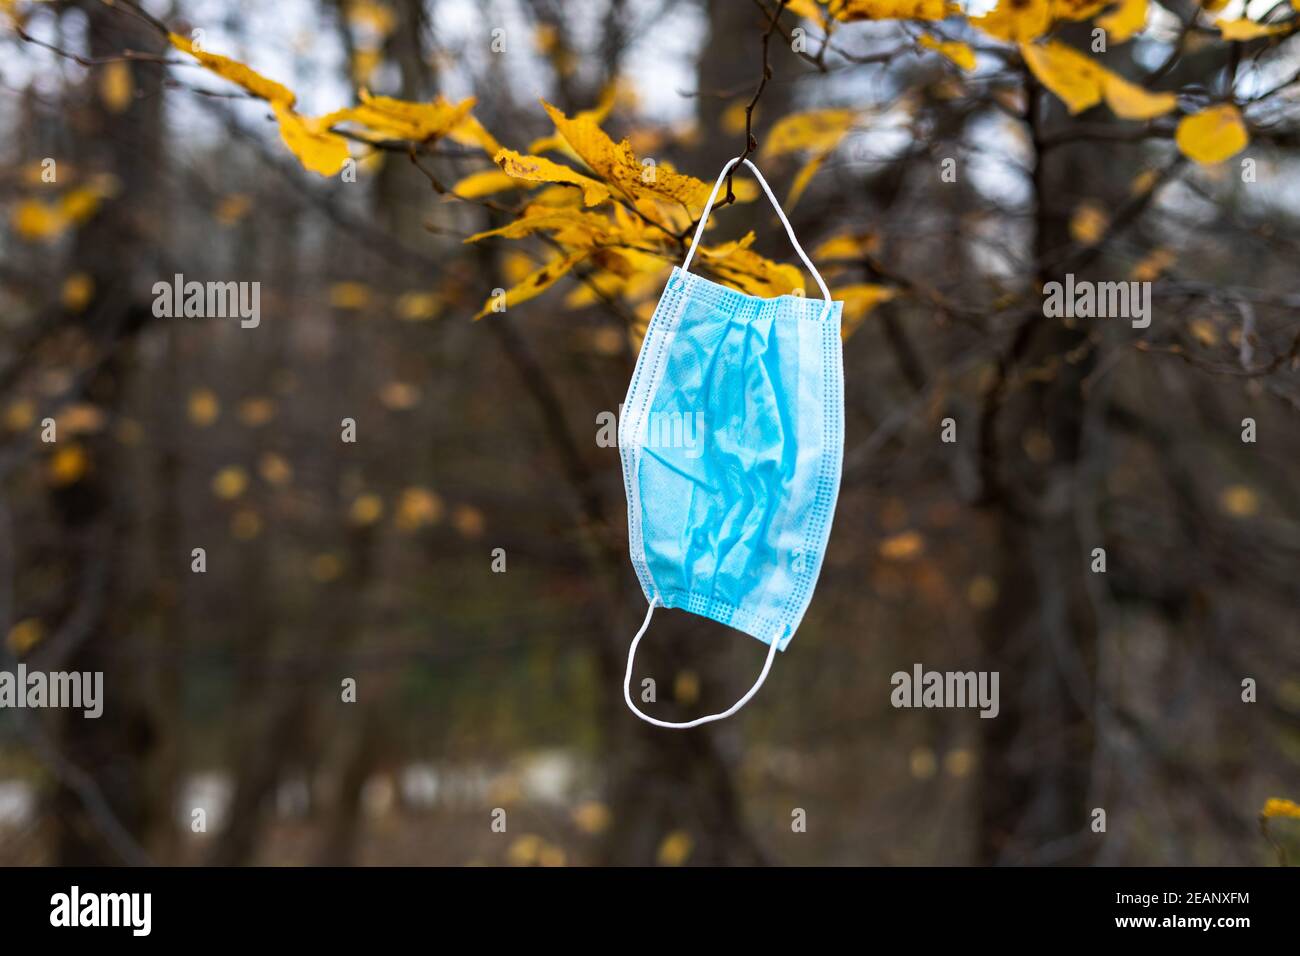 medical face mask deposited on a branch. end of the pandemic. pollution of the environment by disposable masks Stock Photo